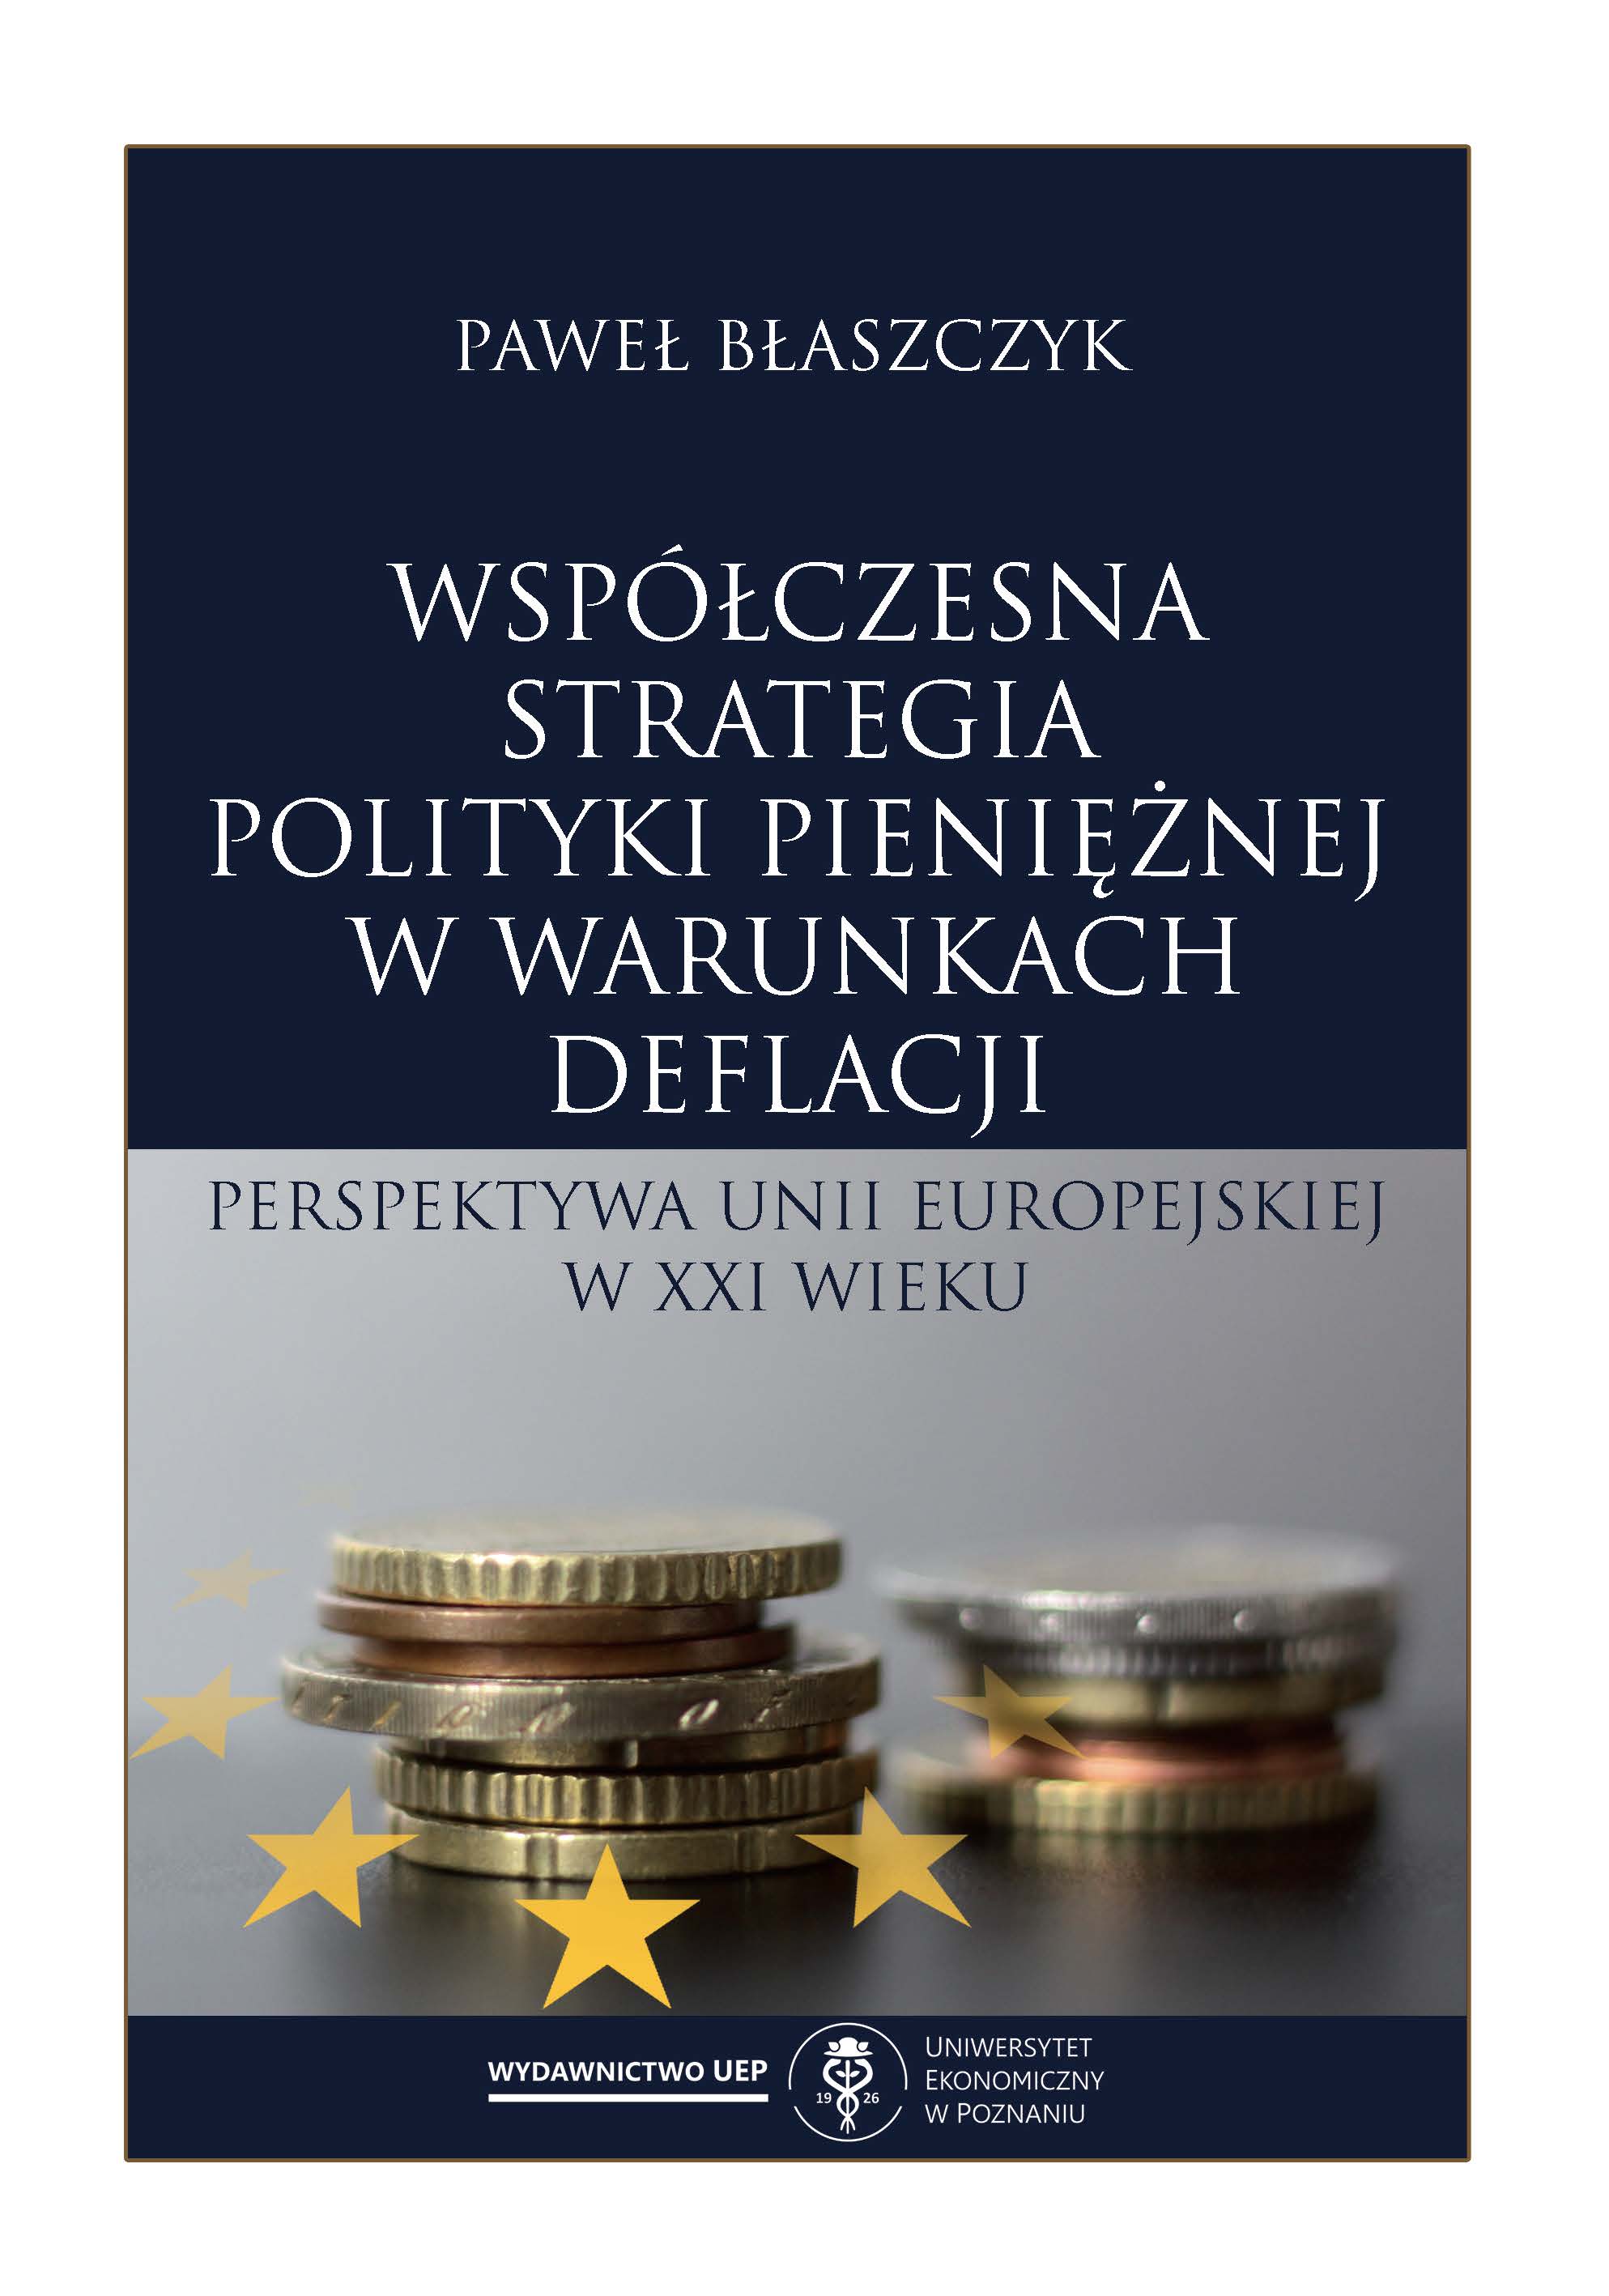 A contemporary monetary policy strategy under the conditions of deflation. The European Union perspective in the 21st century